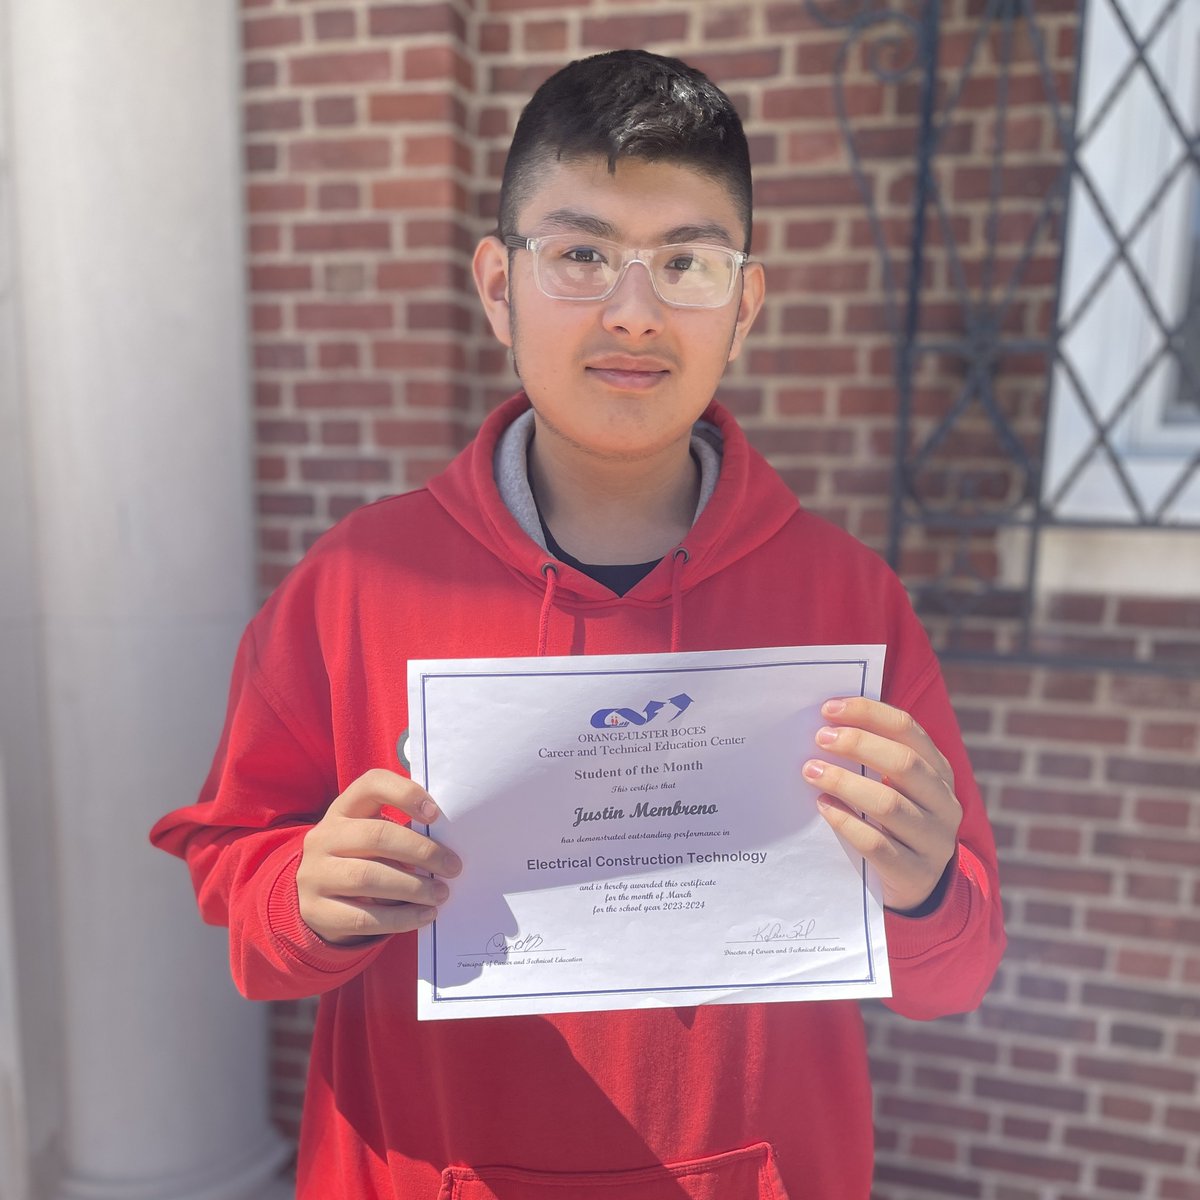 Congratulations to GFB Junior Justin Membreno who received a “Student of the Month” award from the Career and Technical Education Center at Orange-Ulster BOCES for outstanding performance in Electrical Construction Technology!
#vocationaleducation #ouctec #gettingresults #TUFSD